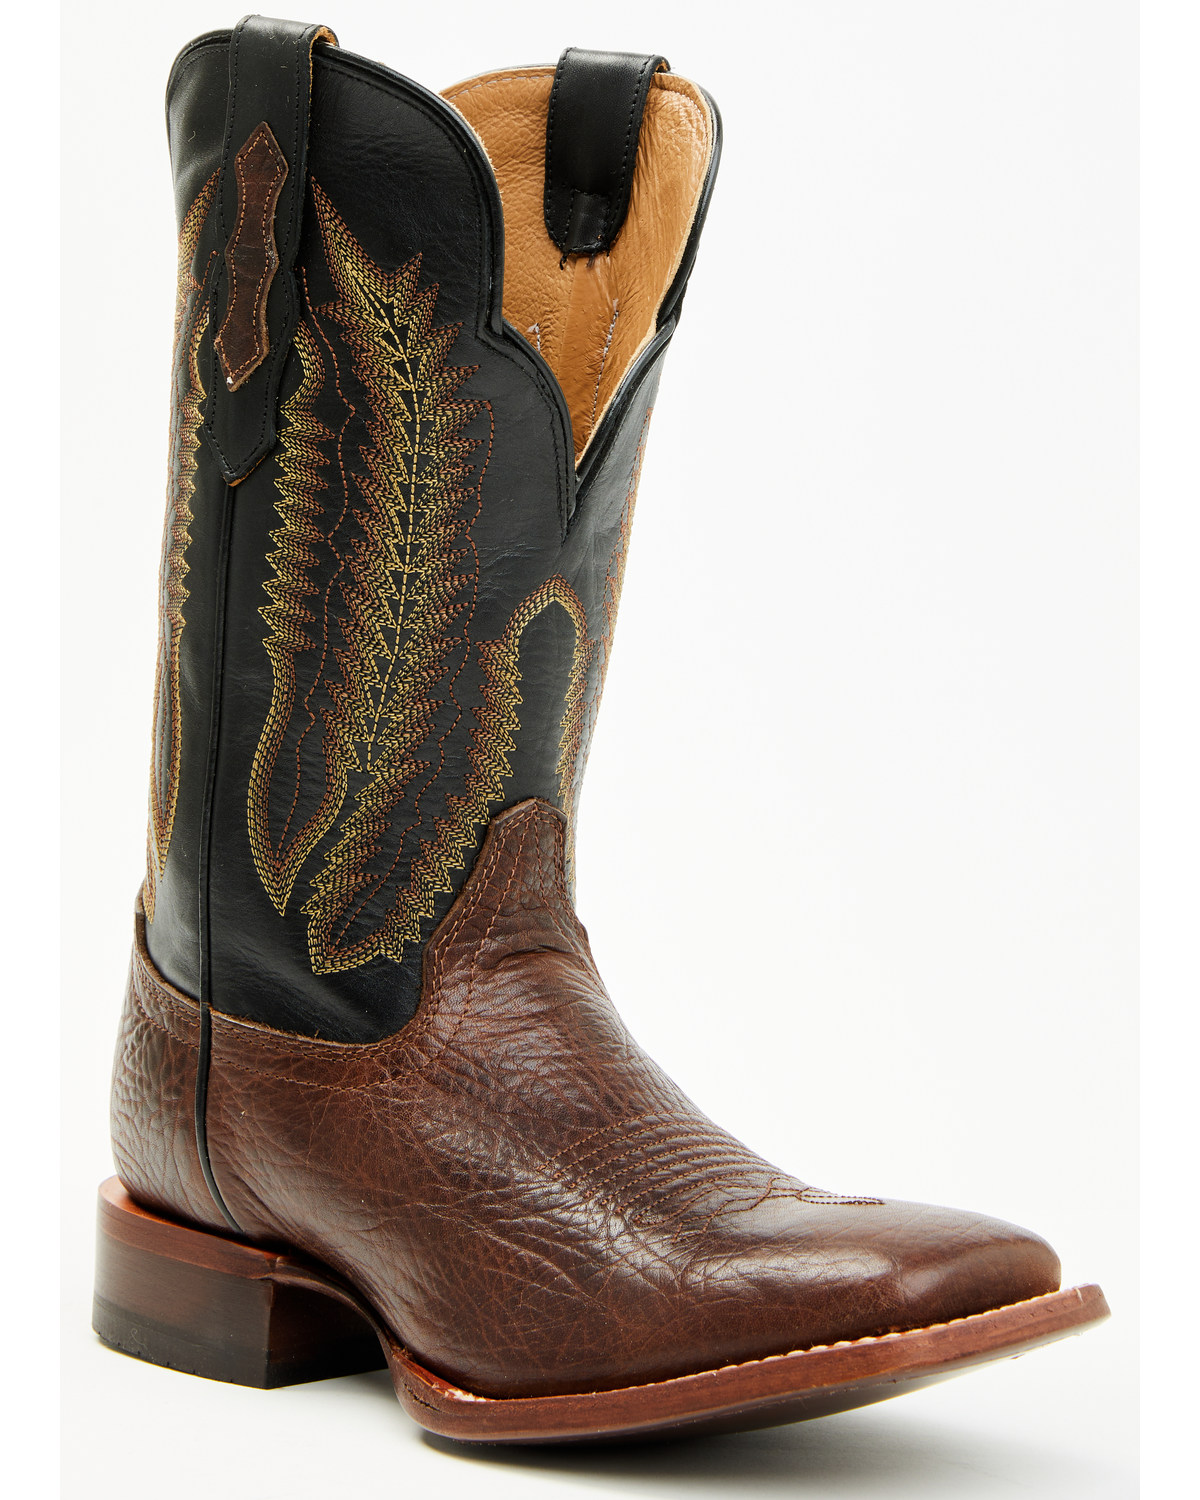 Cody James Men's Buck Western Boots - Broad Square Toe